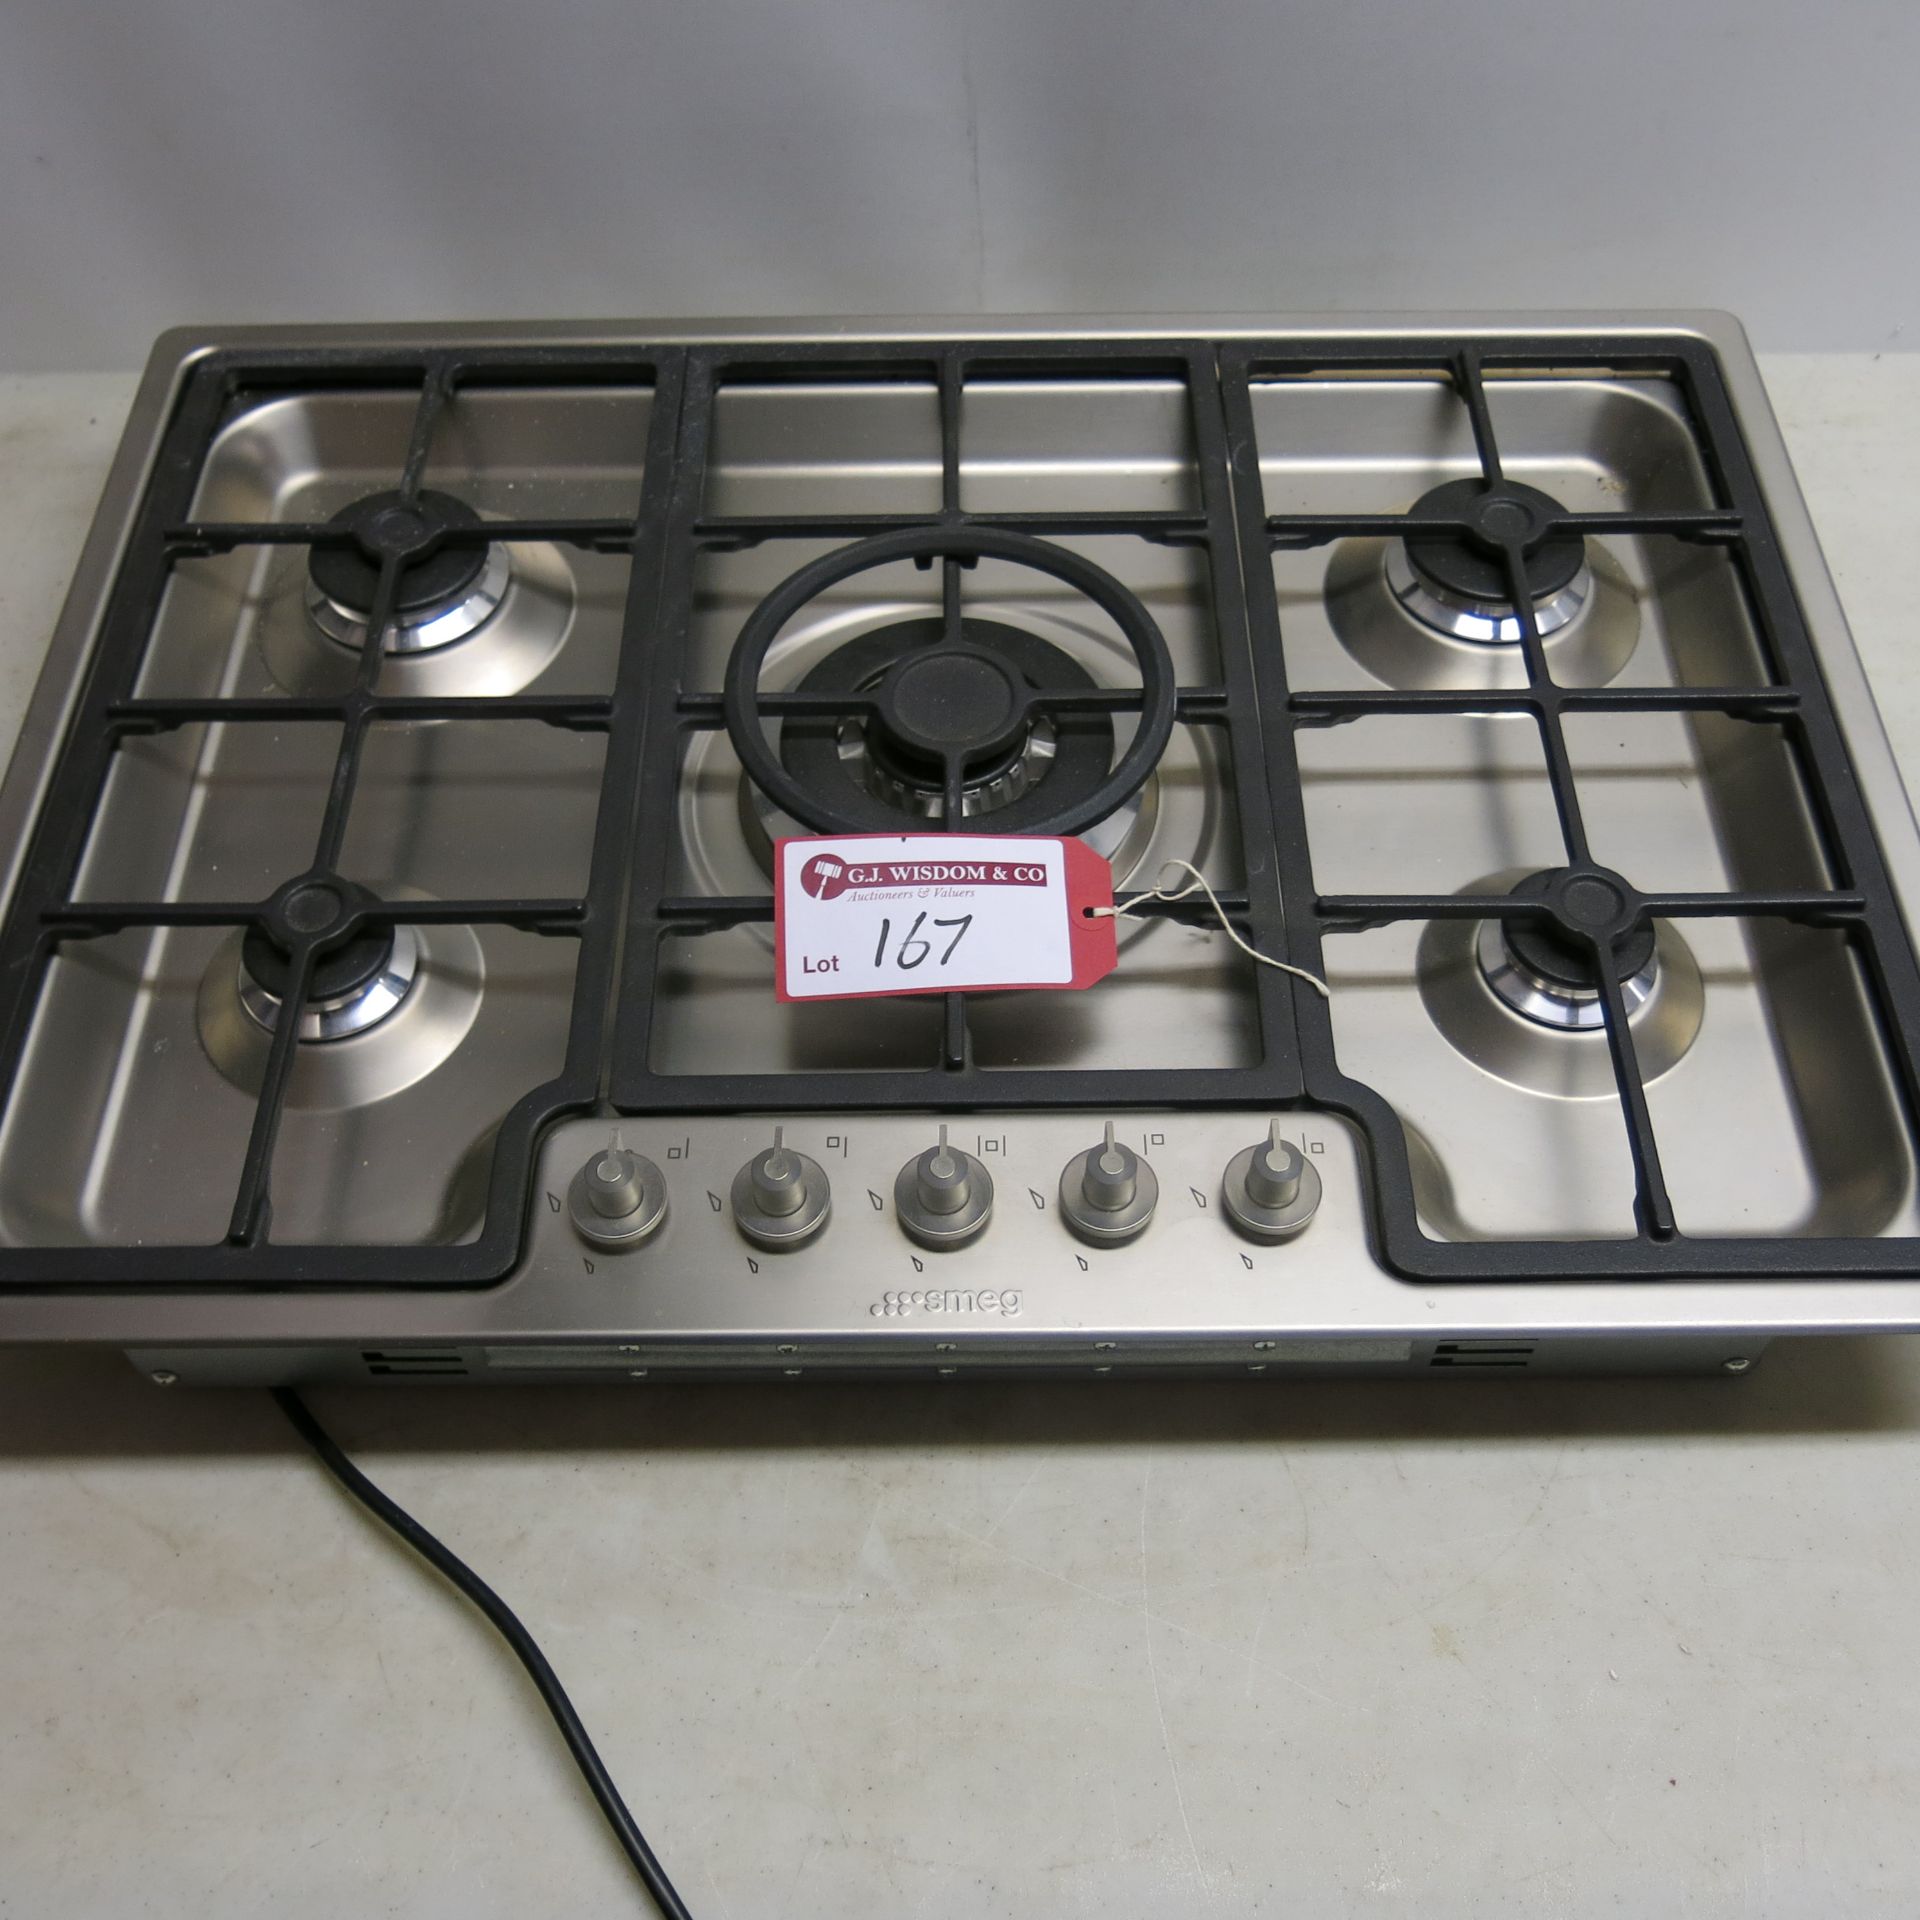 Smeg Stainless Steel 5 Ring Gas Hob, Model PGF75SC63. Size 72cm x 51cm with Wok Attachment. New/Ex